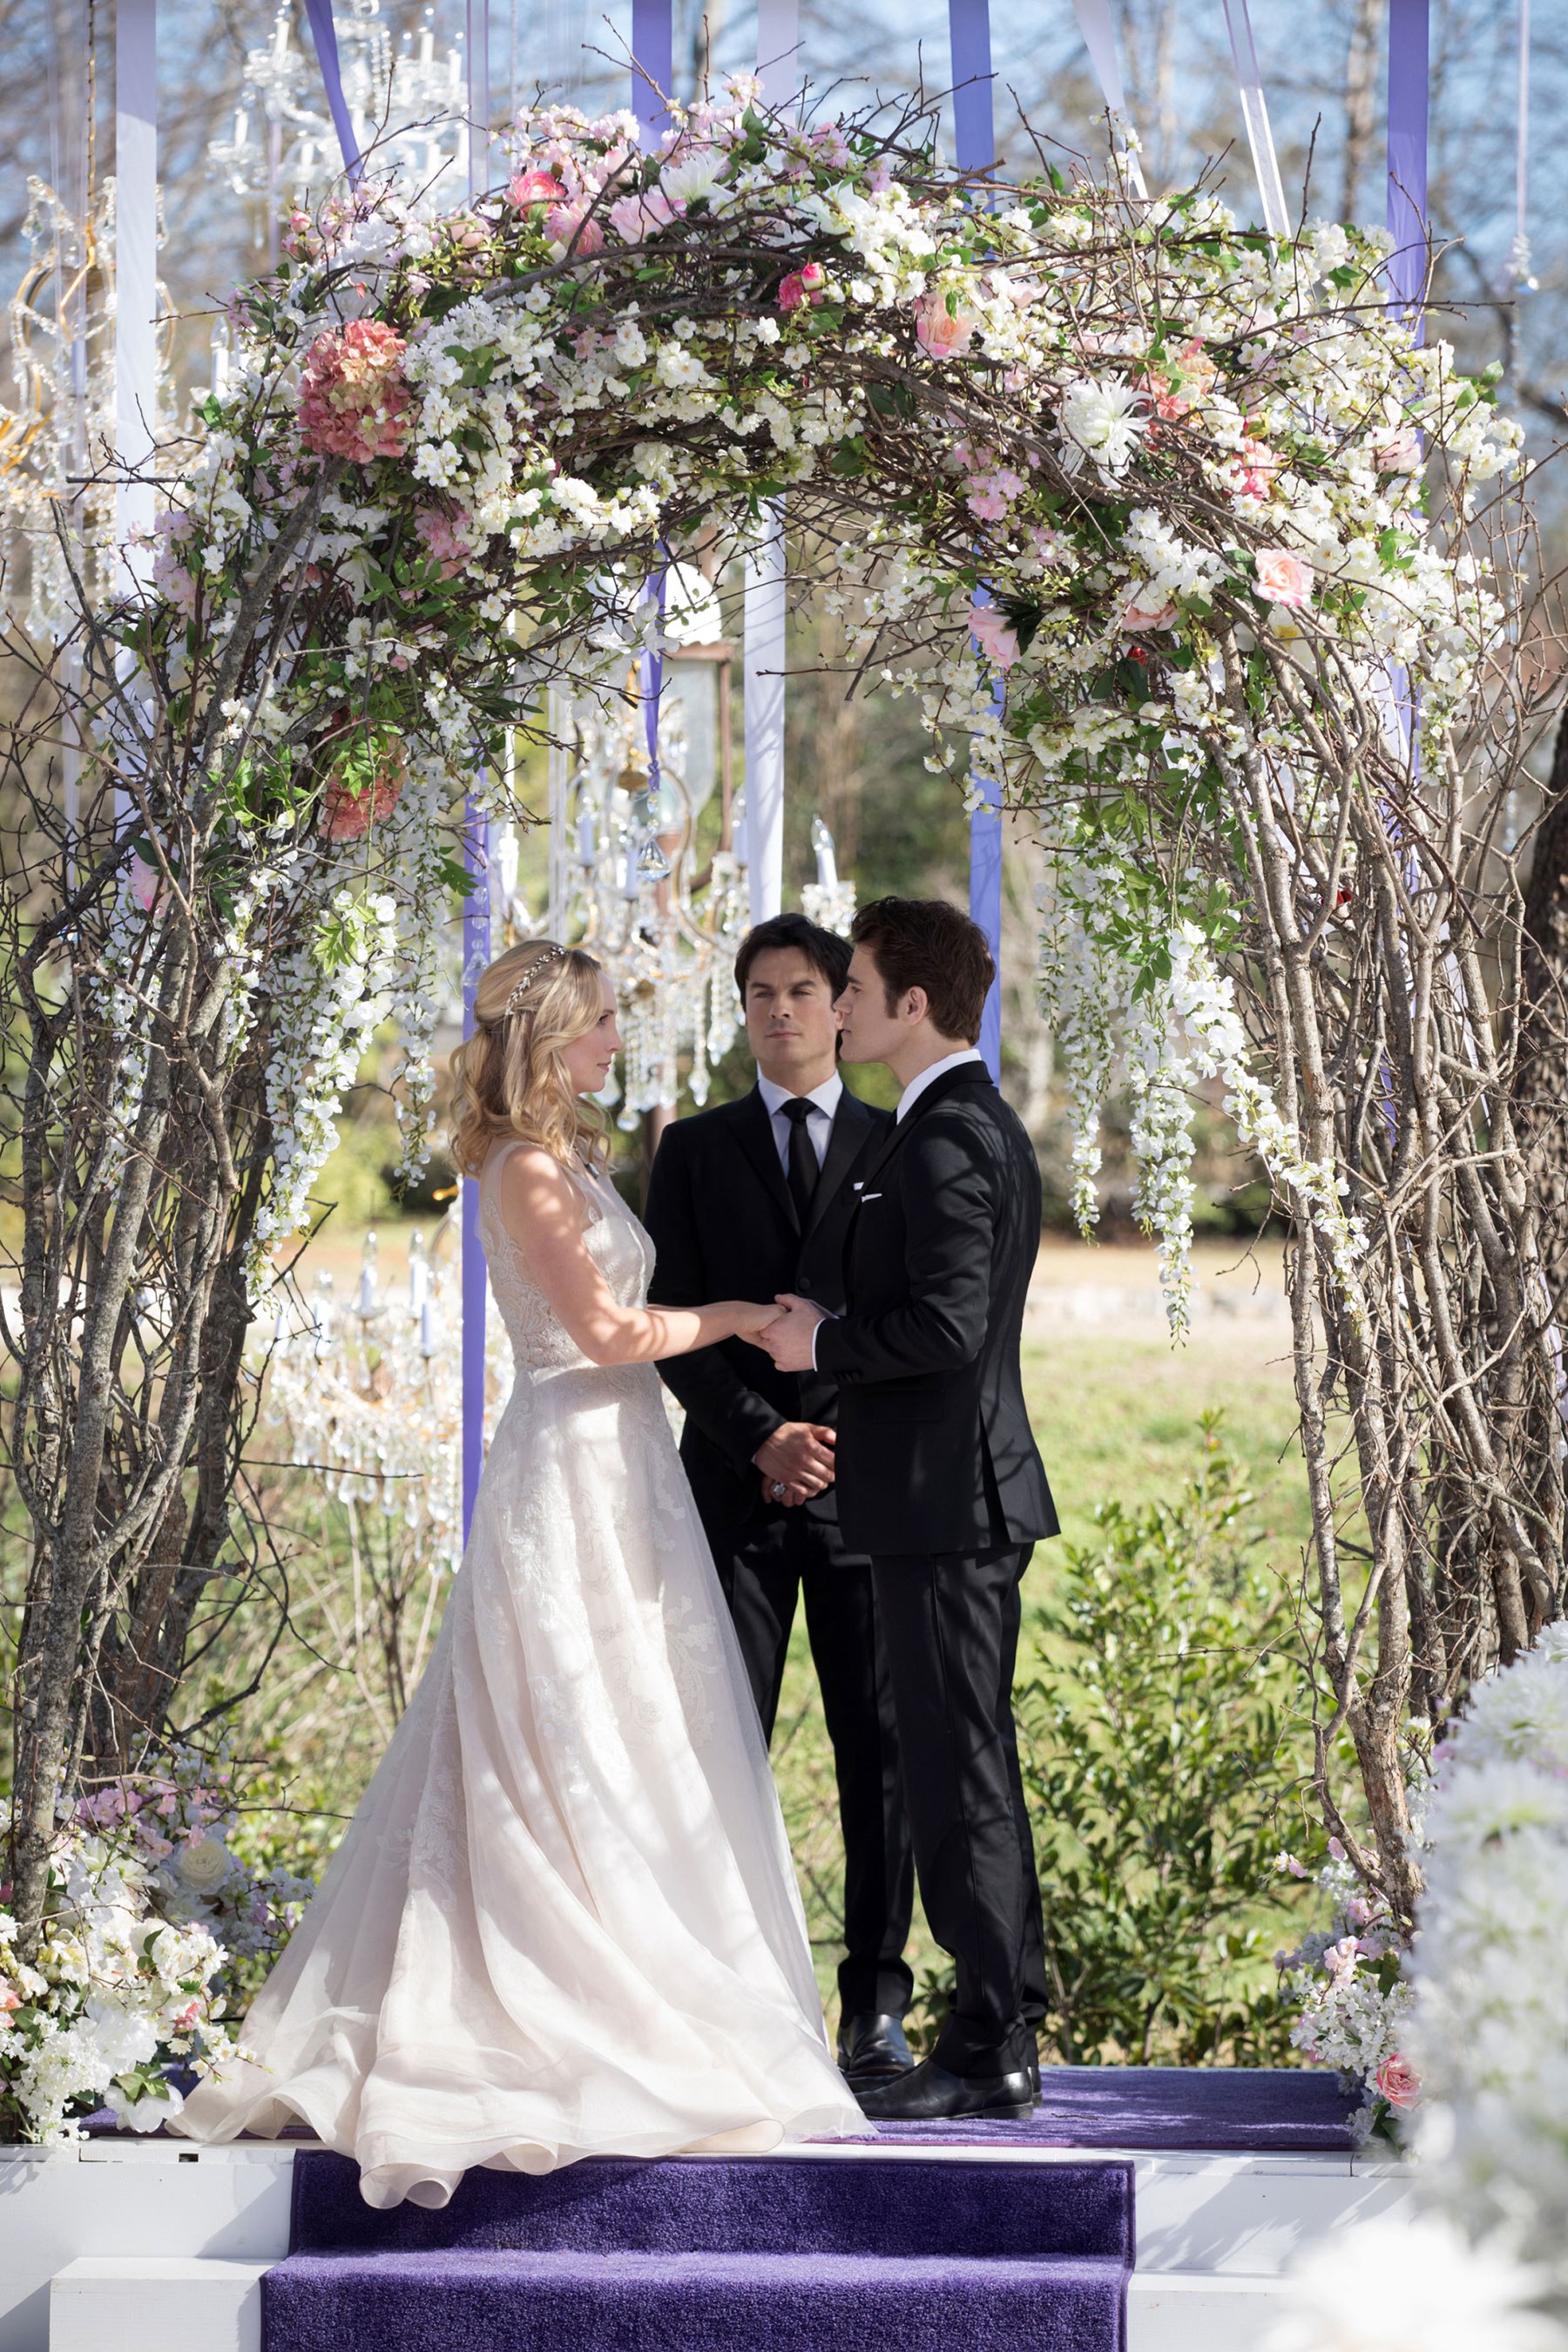 The Vampire Diaries -- "We're Planning a June Wedding" -- Image Number: VD815c_0121.jpg -- Pictured (L-R): Candice King as Caroline, Ian Somerhalder as Damon and Paul Wesley as Stefan -- Photo: Bob Mahoney/The CW -- ÃÂ© 2017 The CW Network, LLC. All Rights Reserved.